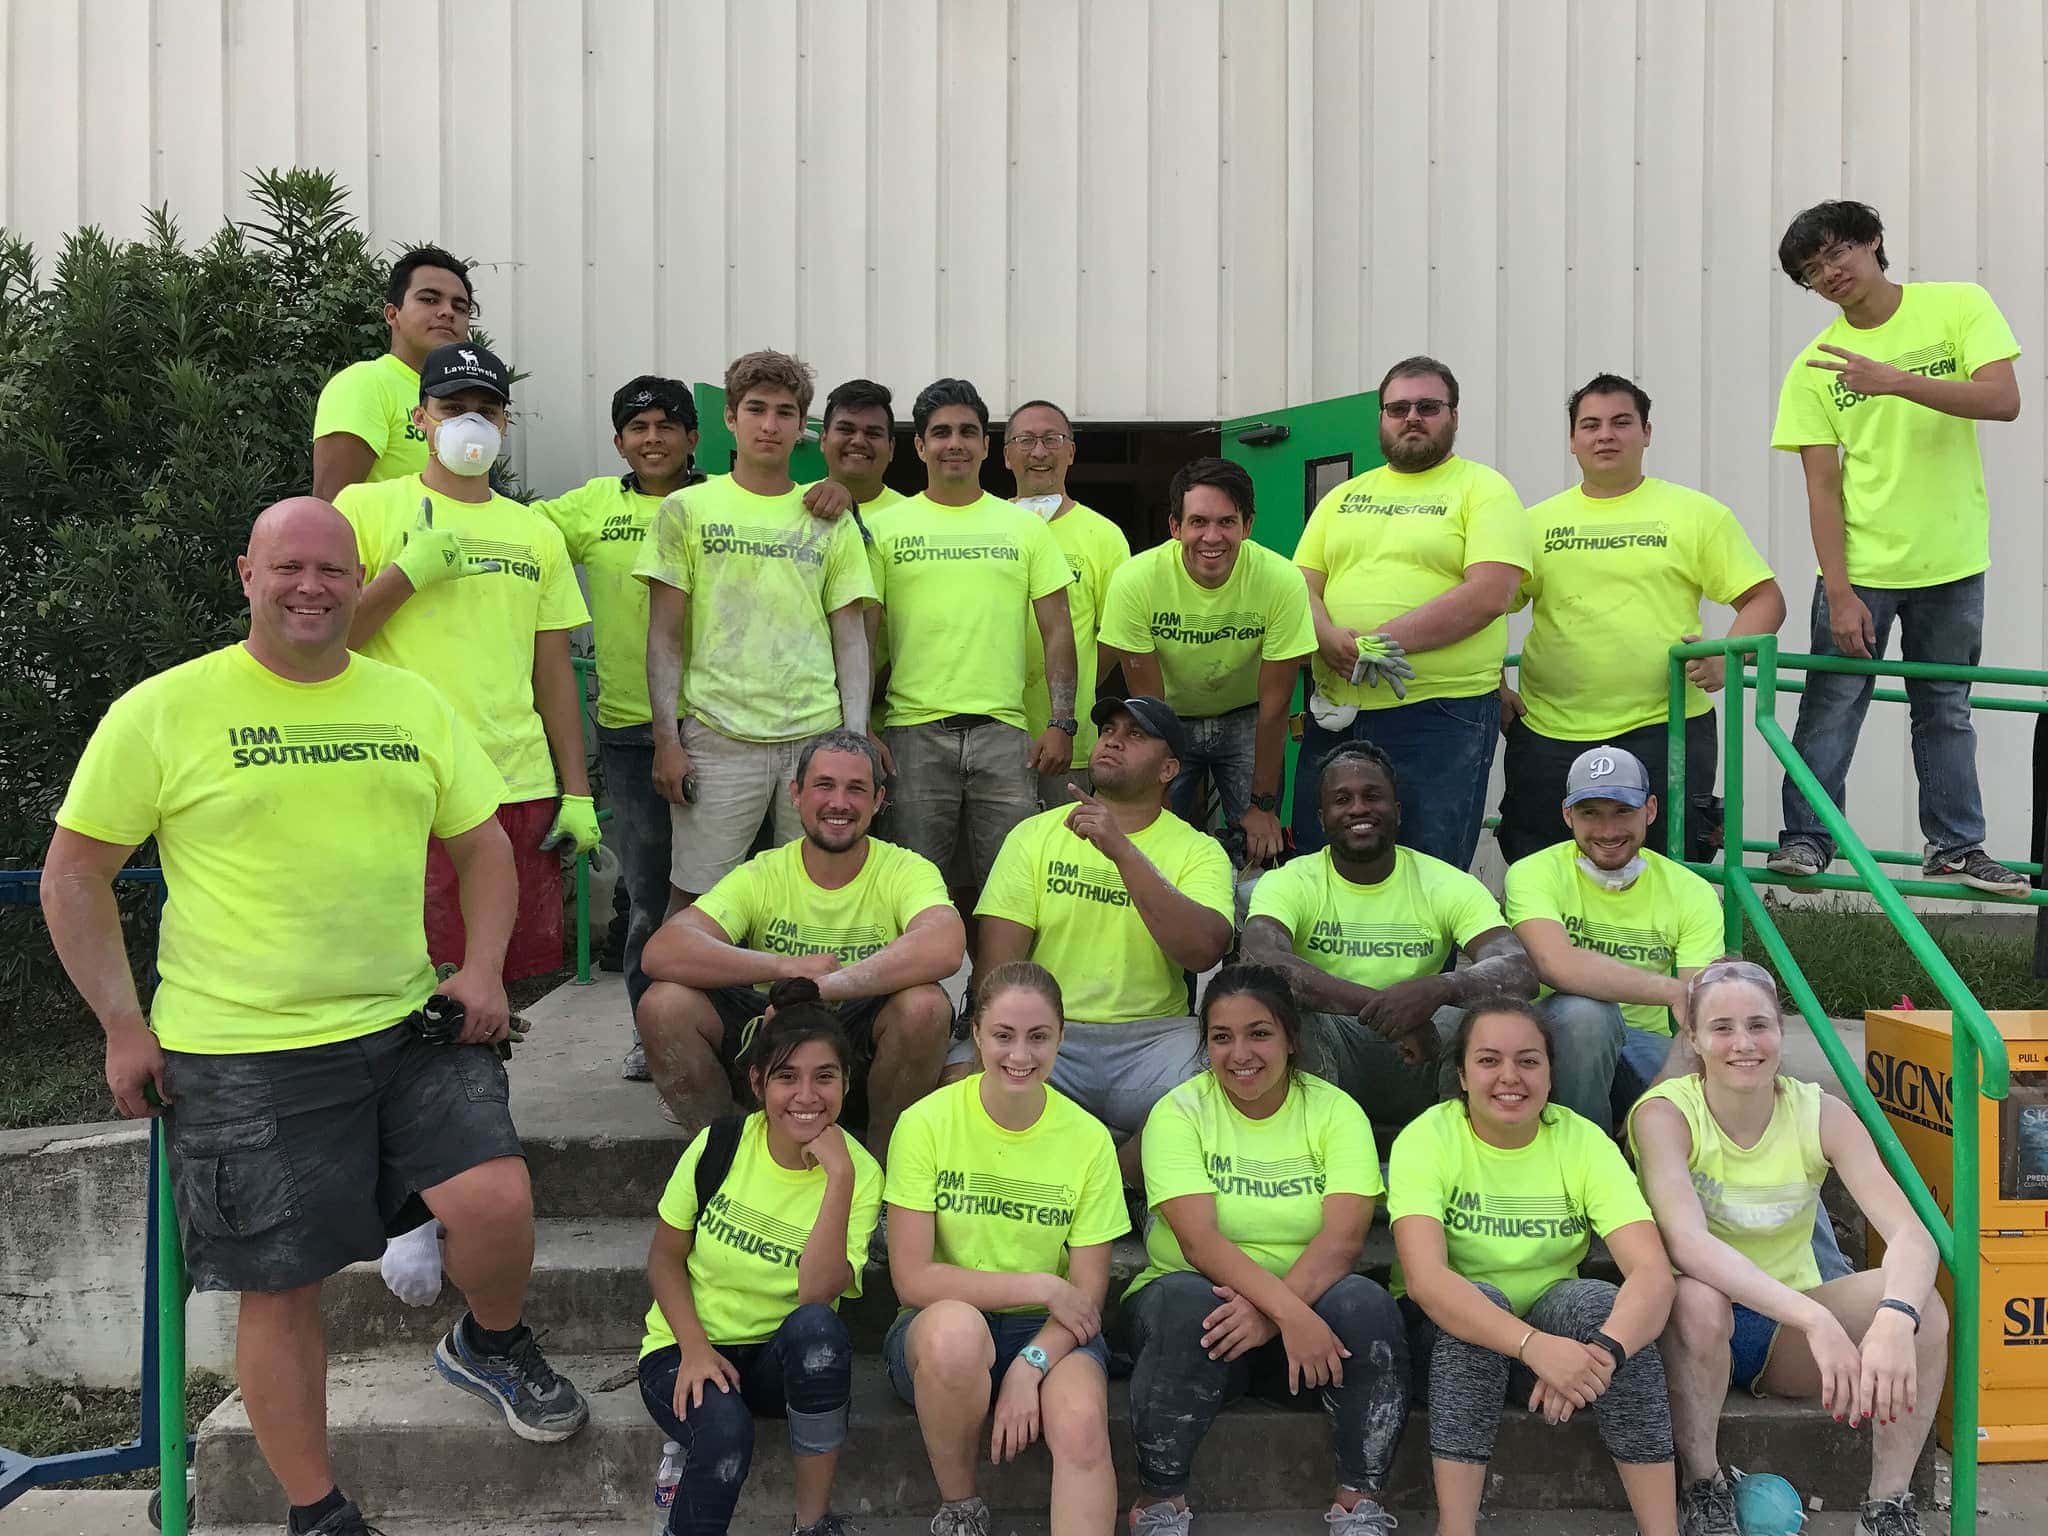 Group of students and staff from Southwestern Adventist University who spent Labor Day weekend to support cleaning and restoration efforts in Houston. [Photo: Southwestern Adventist University]